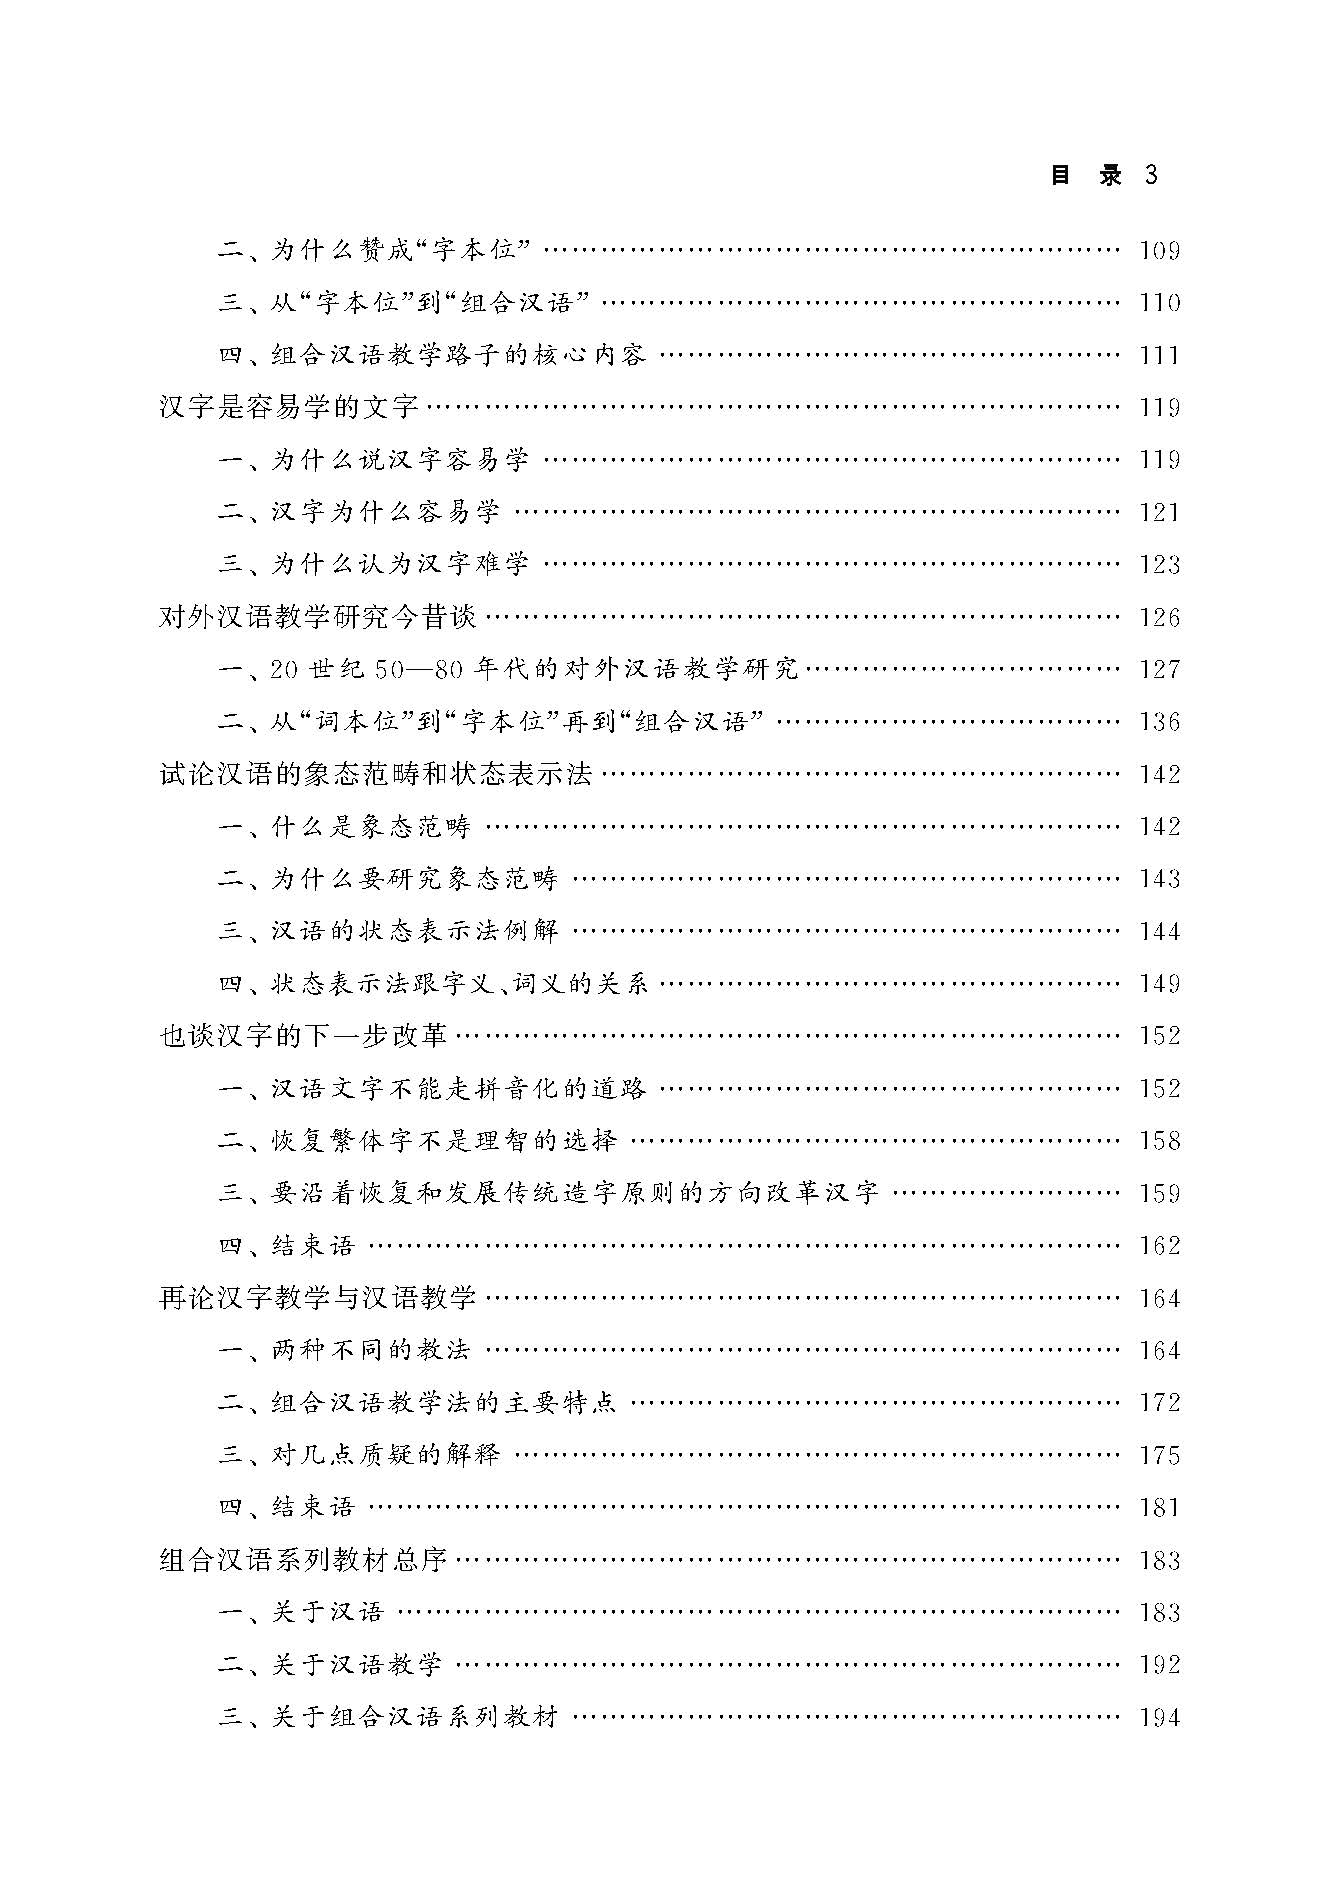 Table of contents: 汉语教学名家文选  吕必松卷  组合汉语研究的足迹 (ISBN:9787561961018)